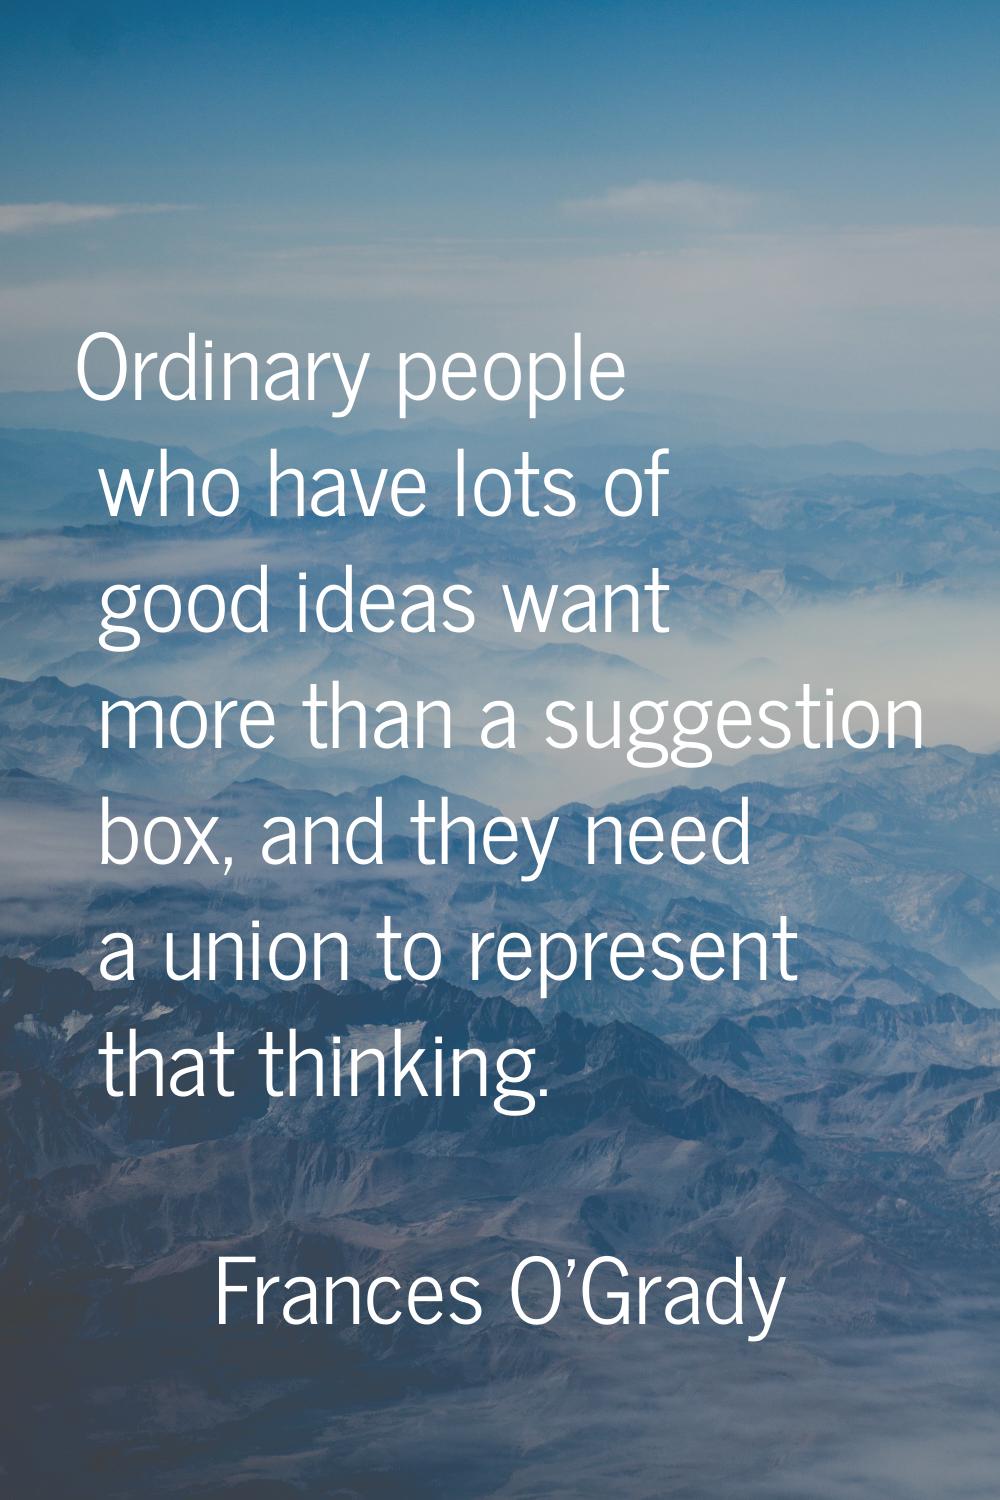 Ordinary people who have lots of good ideas want more than a suggestion box, and they need a union 